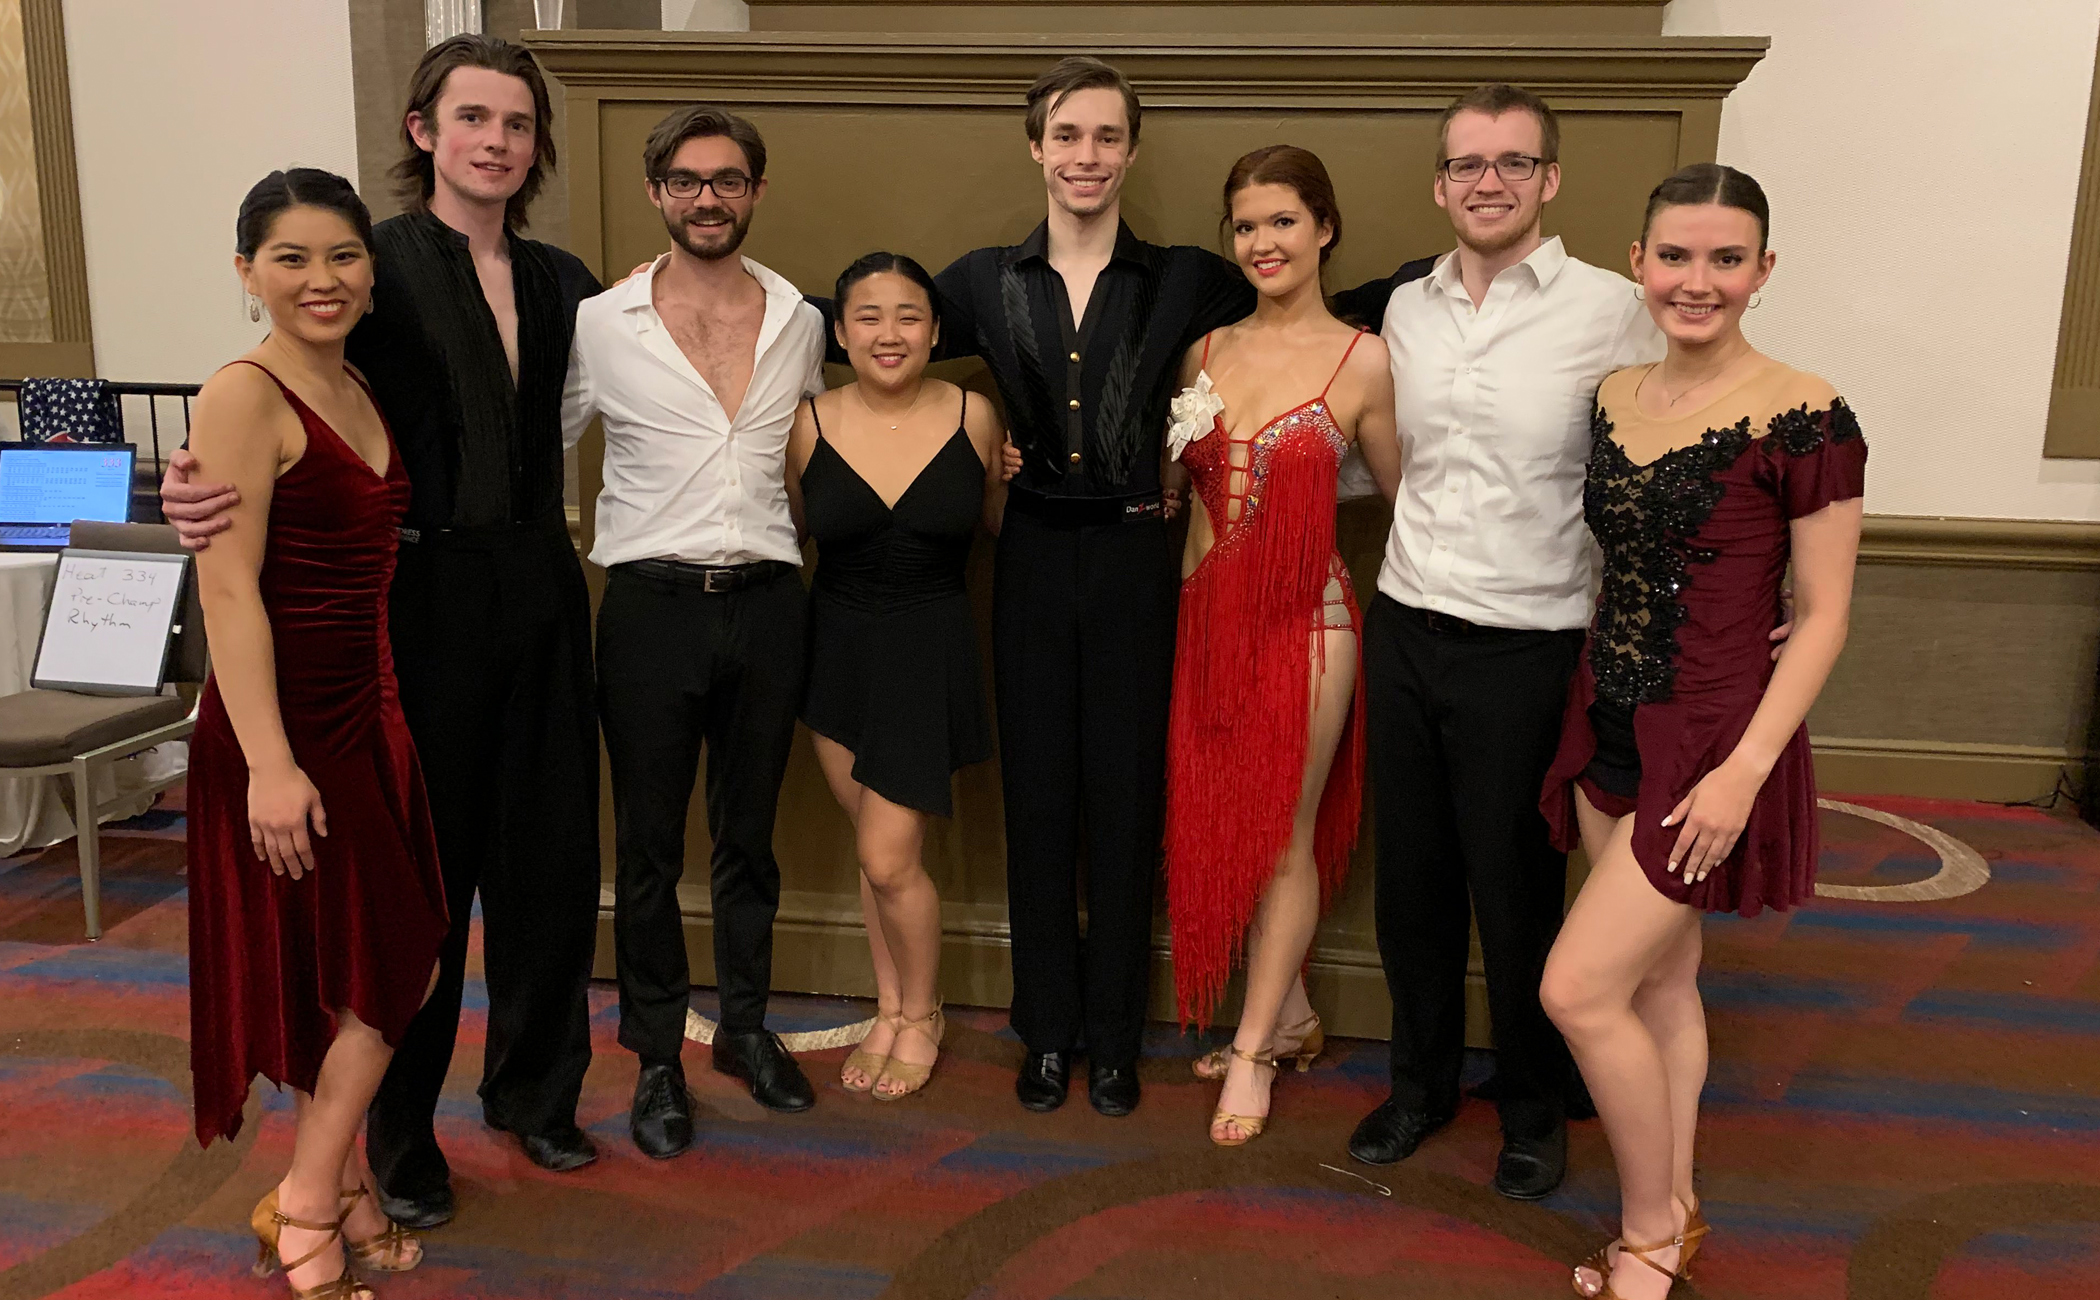 Several members of the ballroom dance team posing before the competition